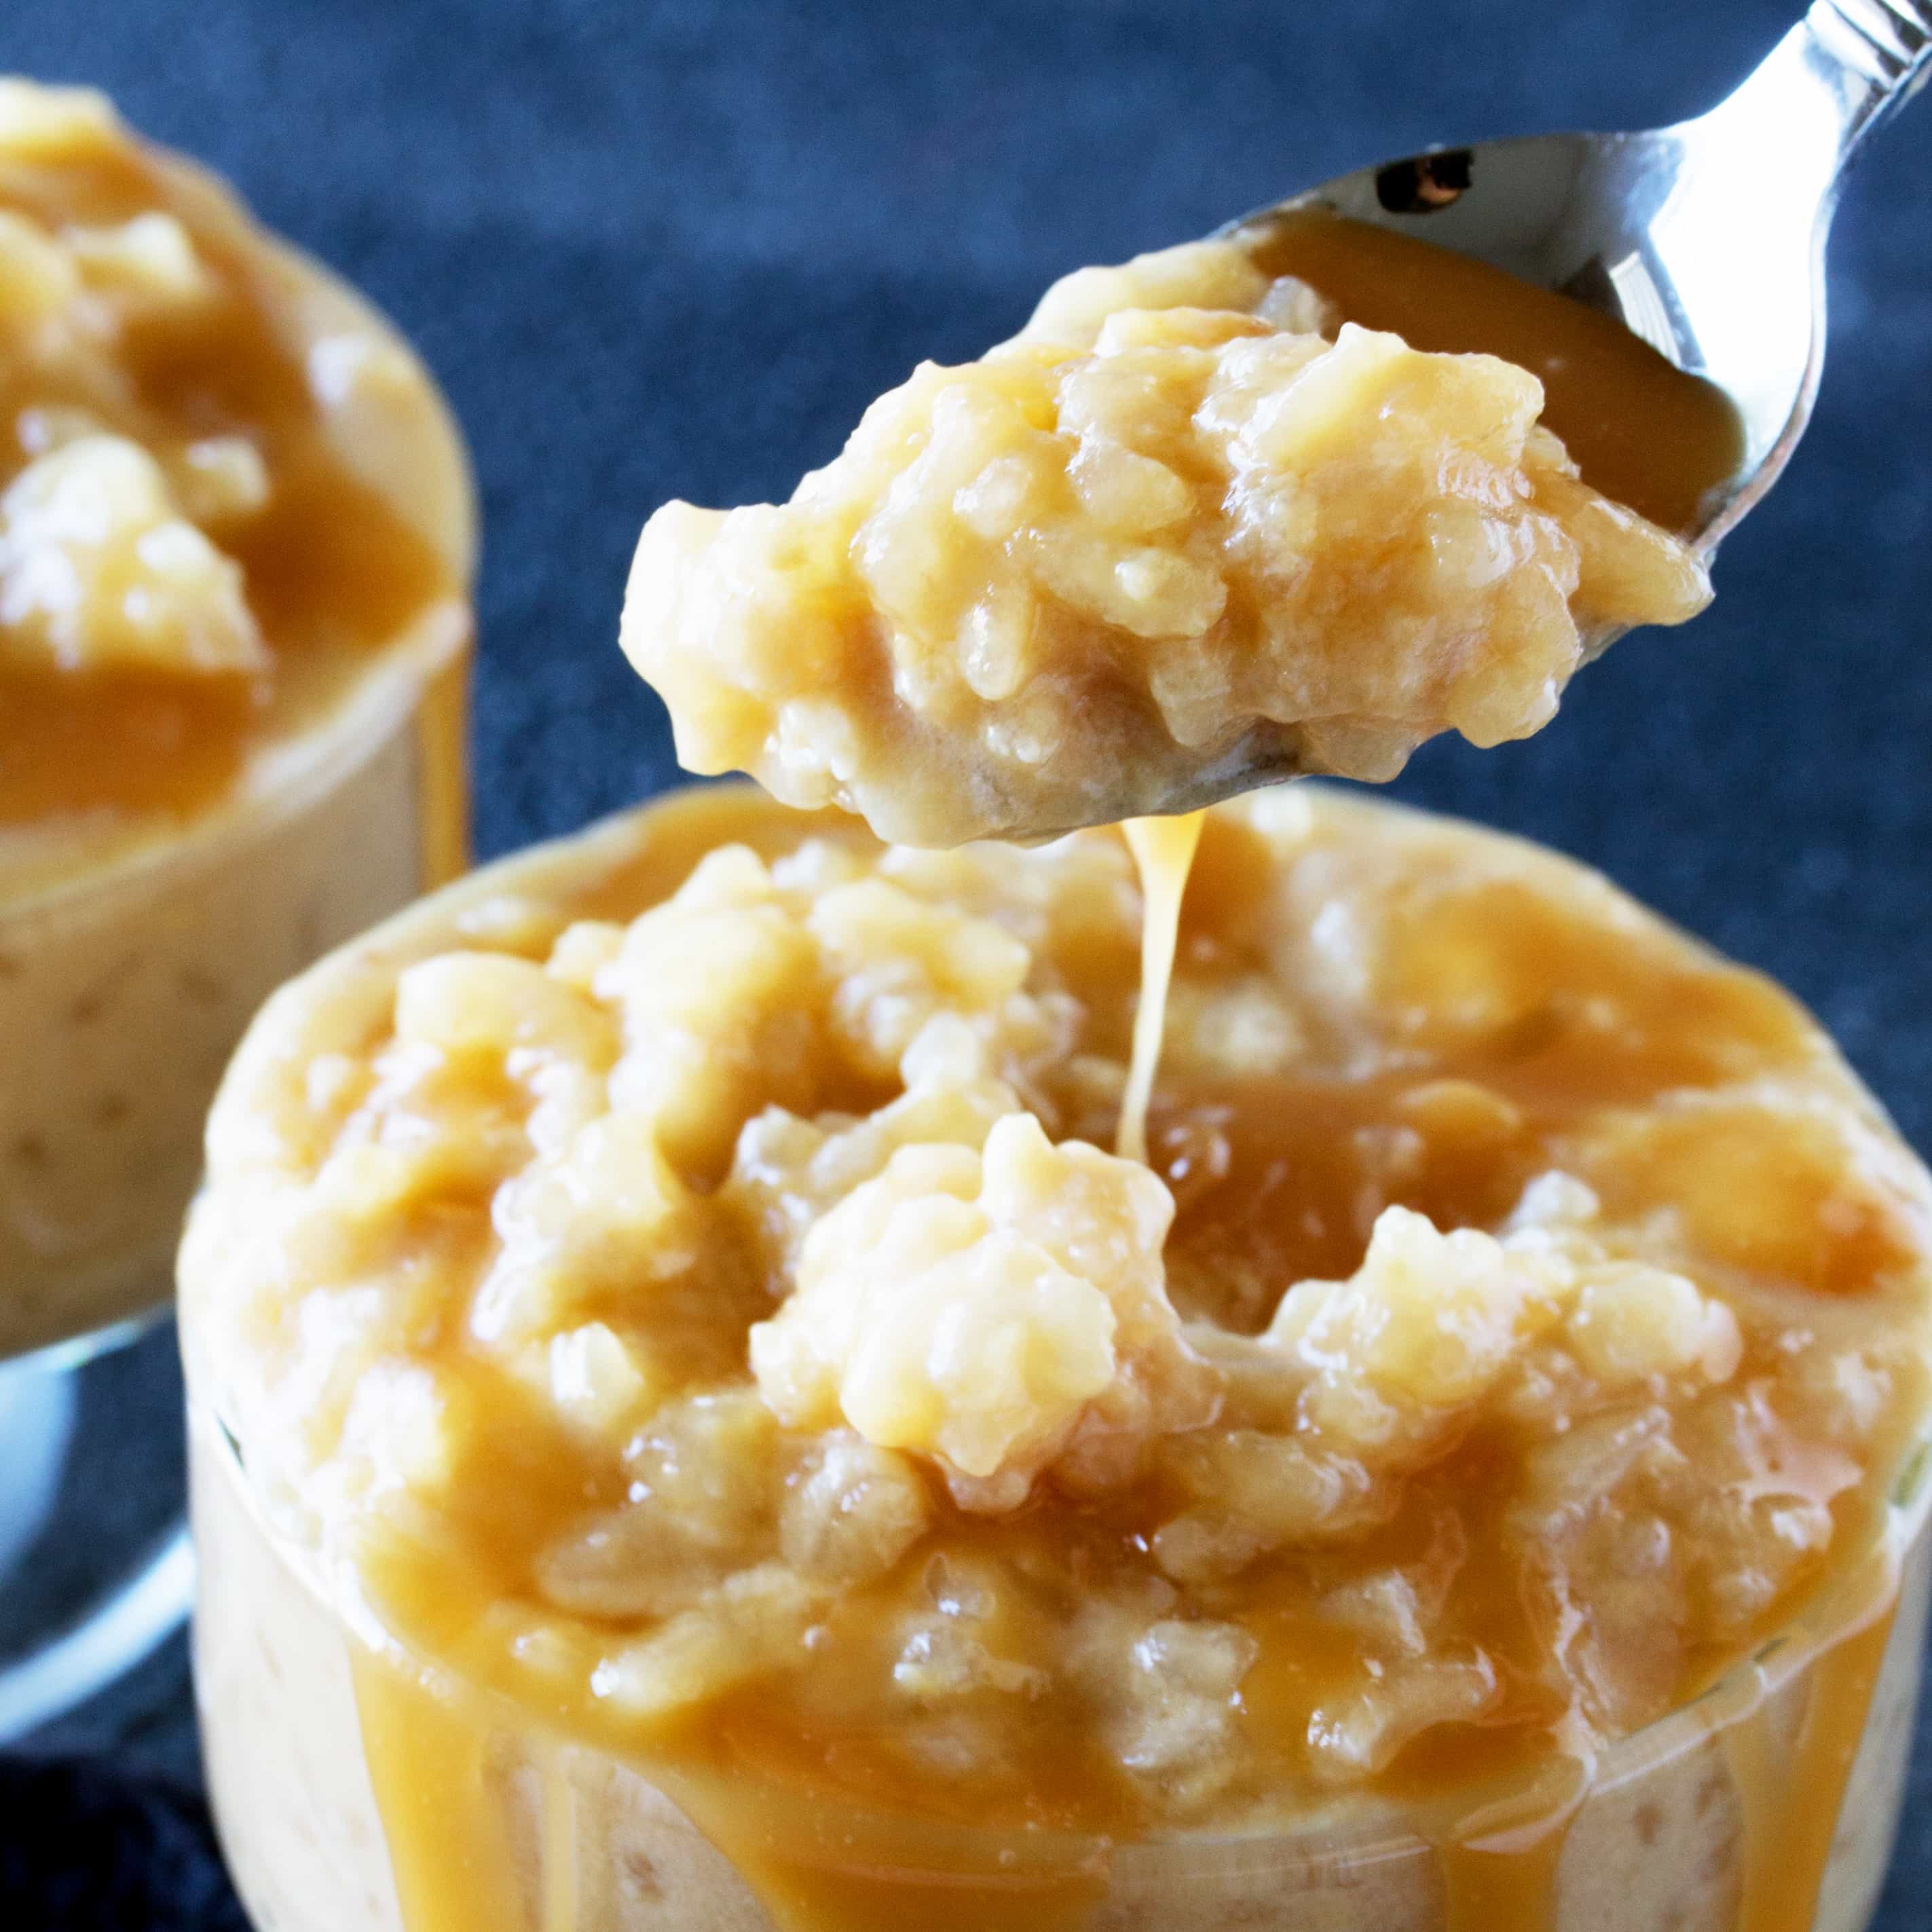 This classic dessert gets a modern upgrade. Make Salted Caramel Rice Pudding from scratch and enjoy a decadent twist on an old fashioned favorite.